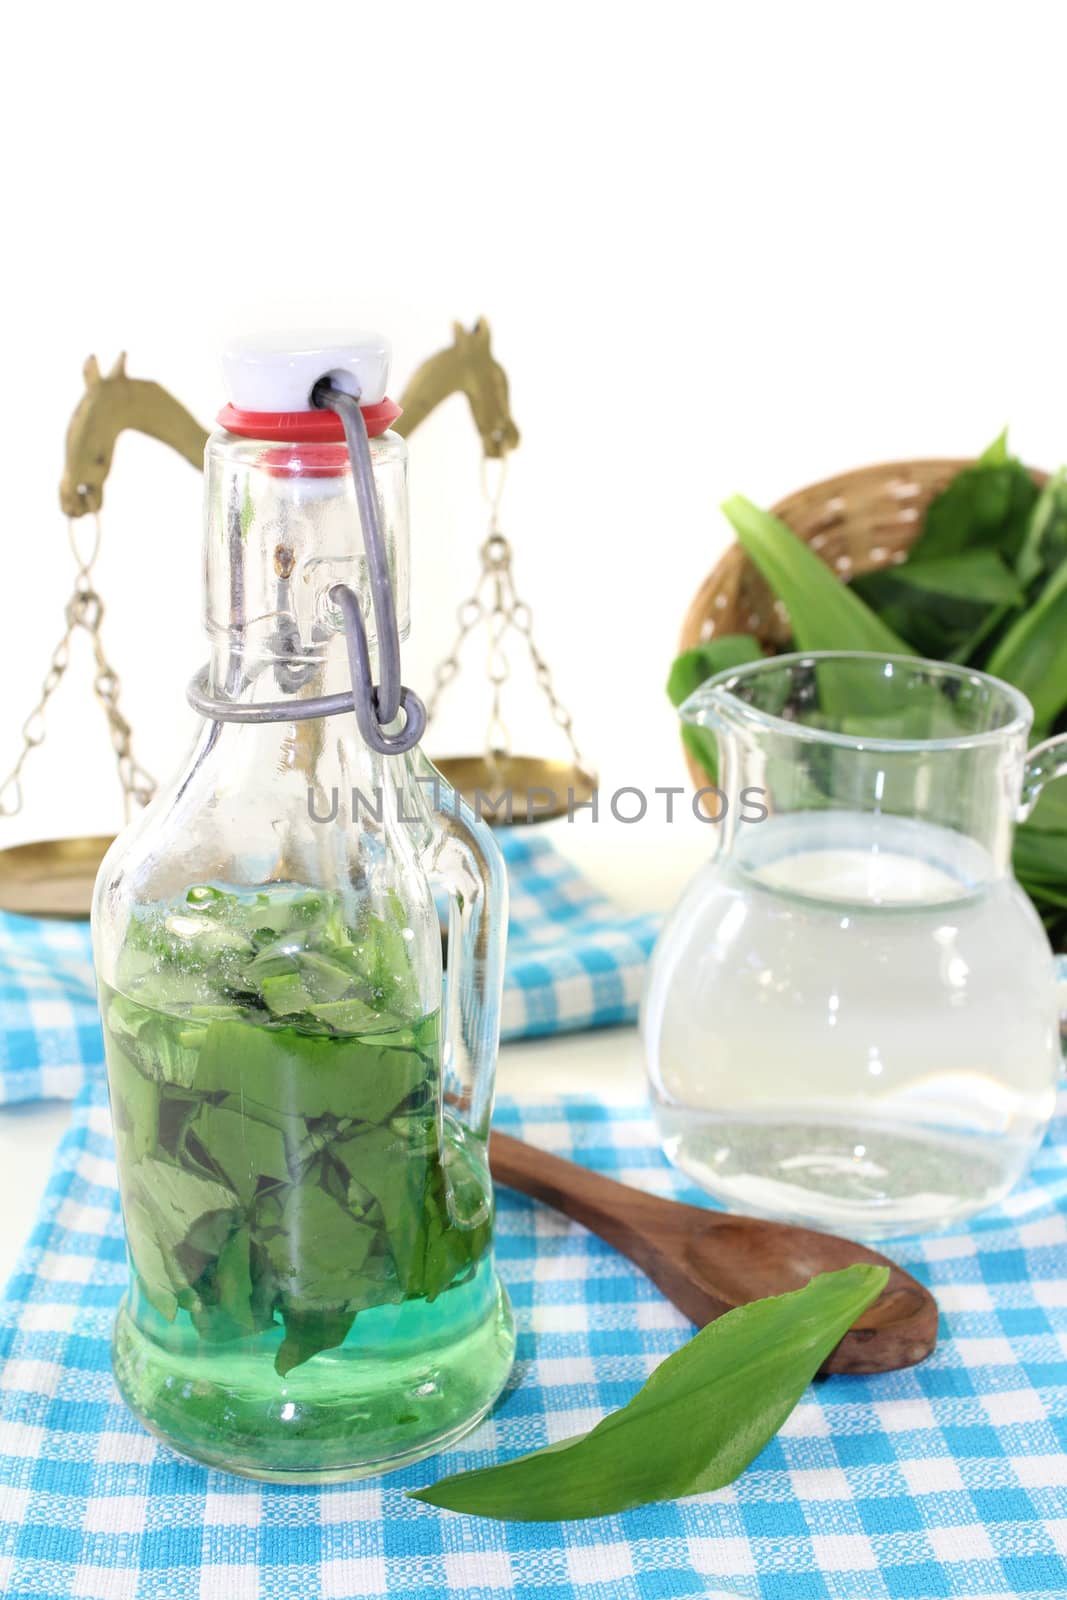 wild garlic tincture in a bottle with scale on light background